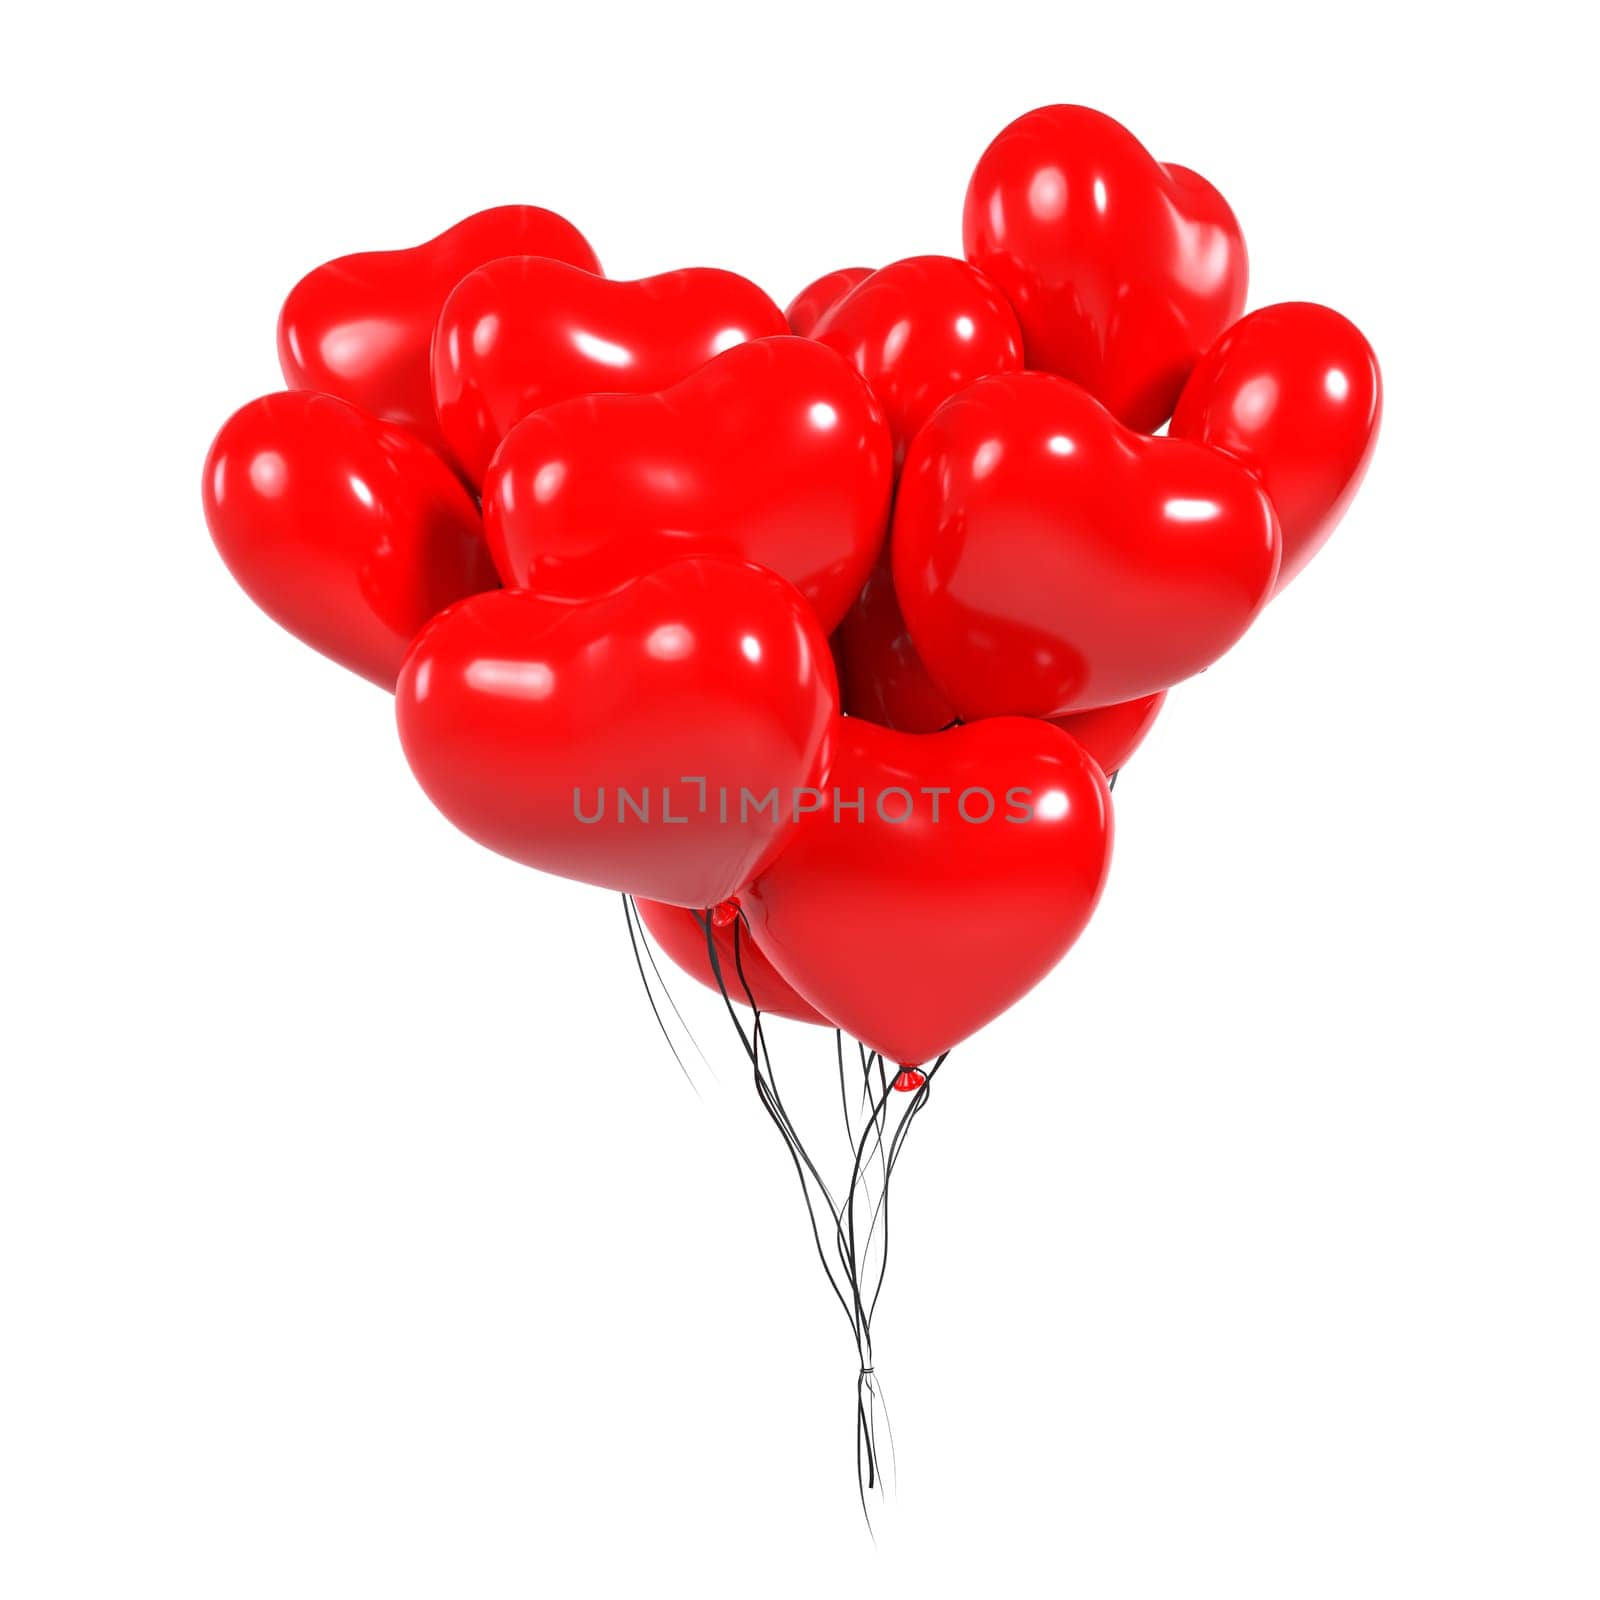 Red Balloons isolated on white background. High quality 3d illustration